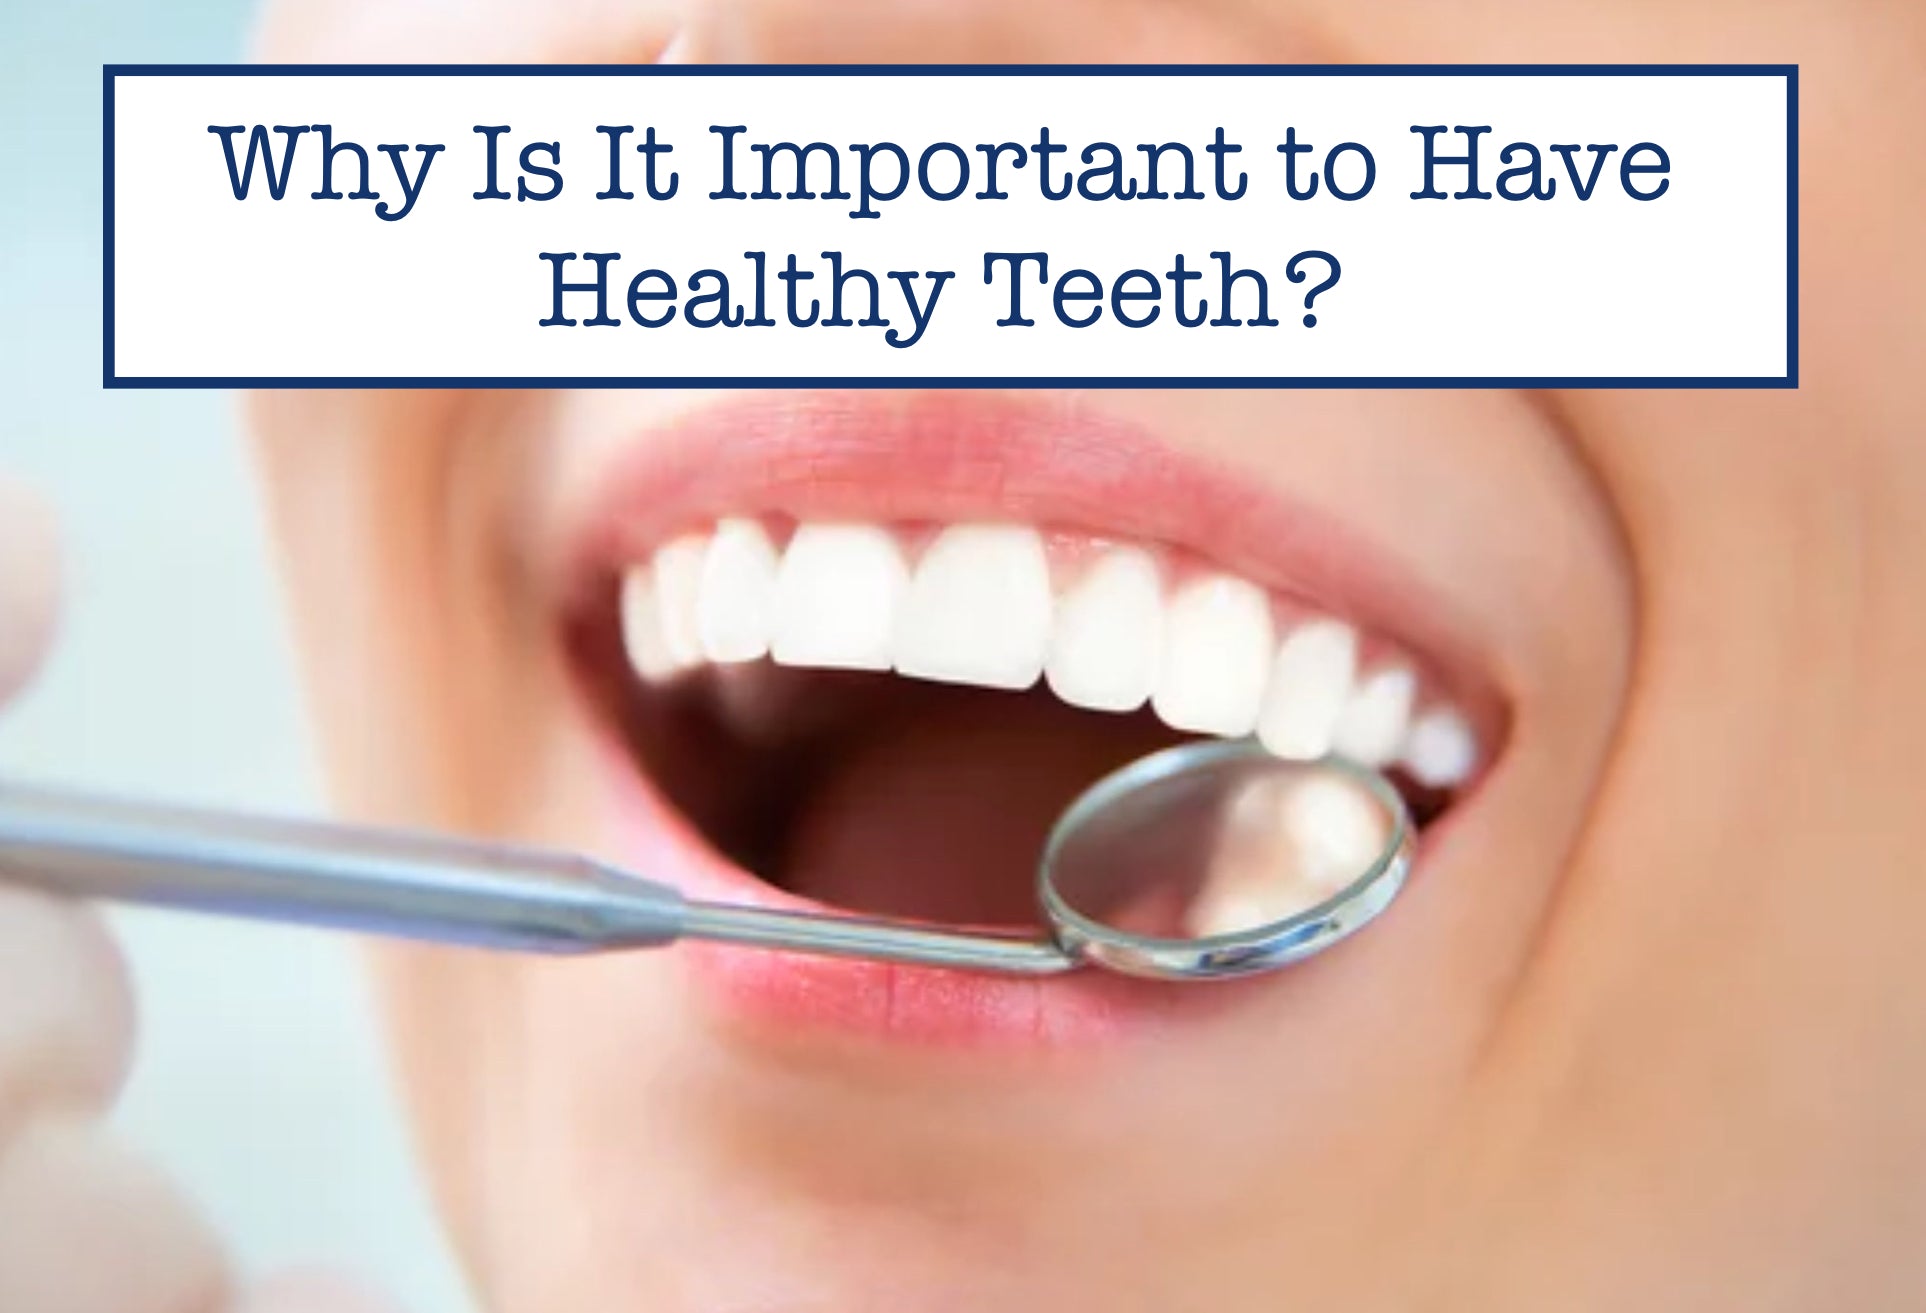 Why Is It Important to Have Healthy Teeth?